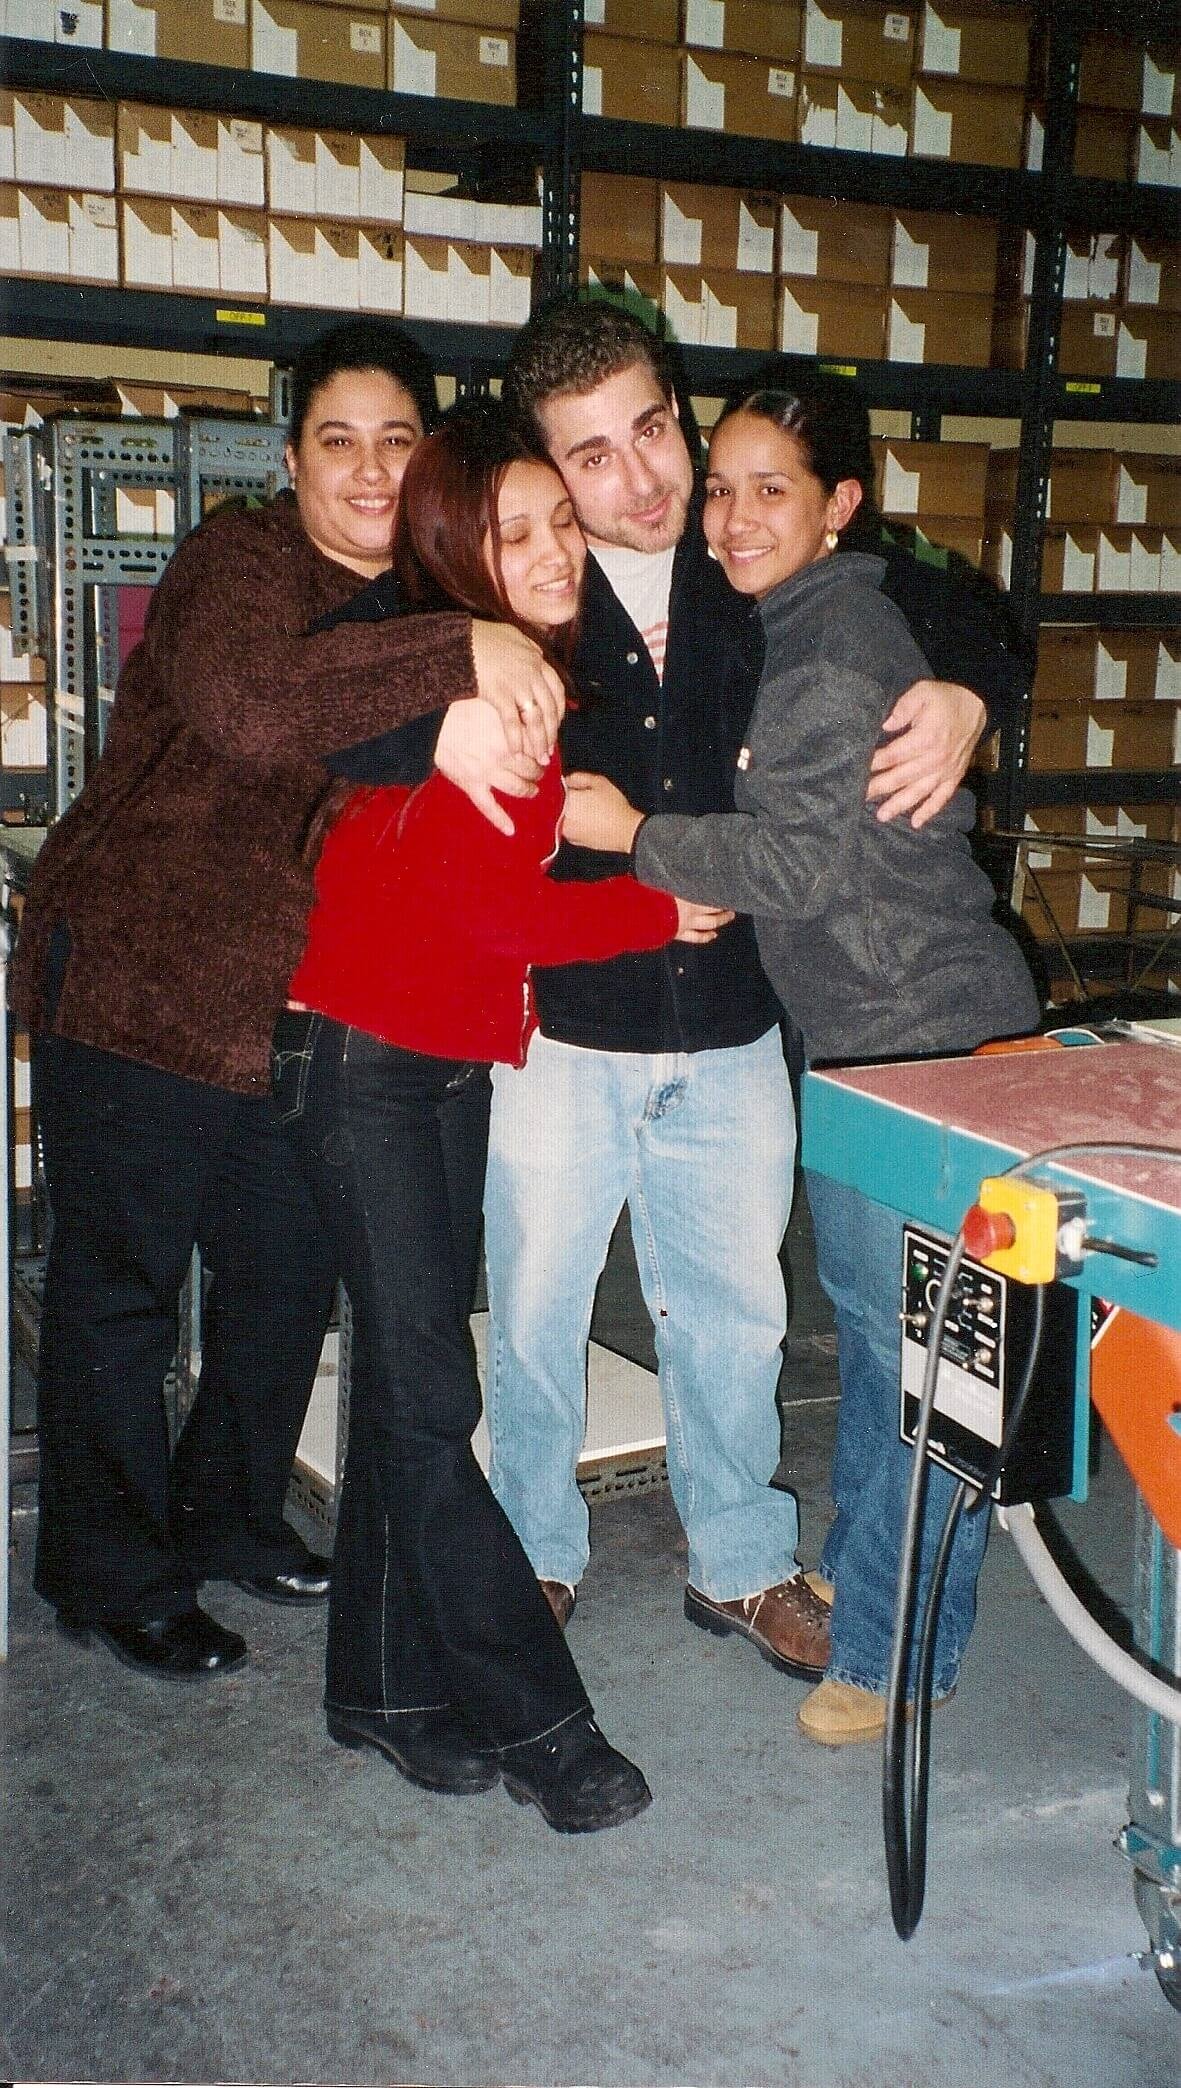 David and team at the Flortek holiday party in 2000.